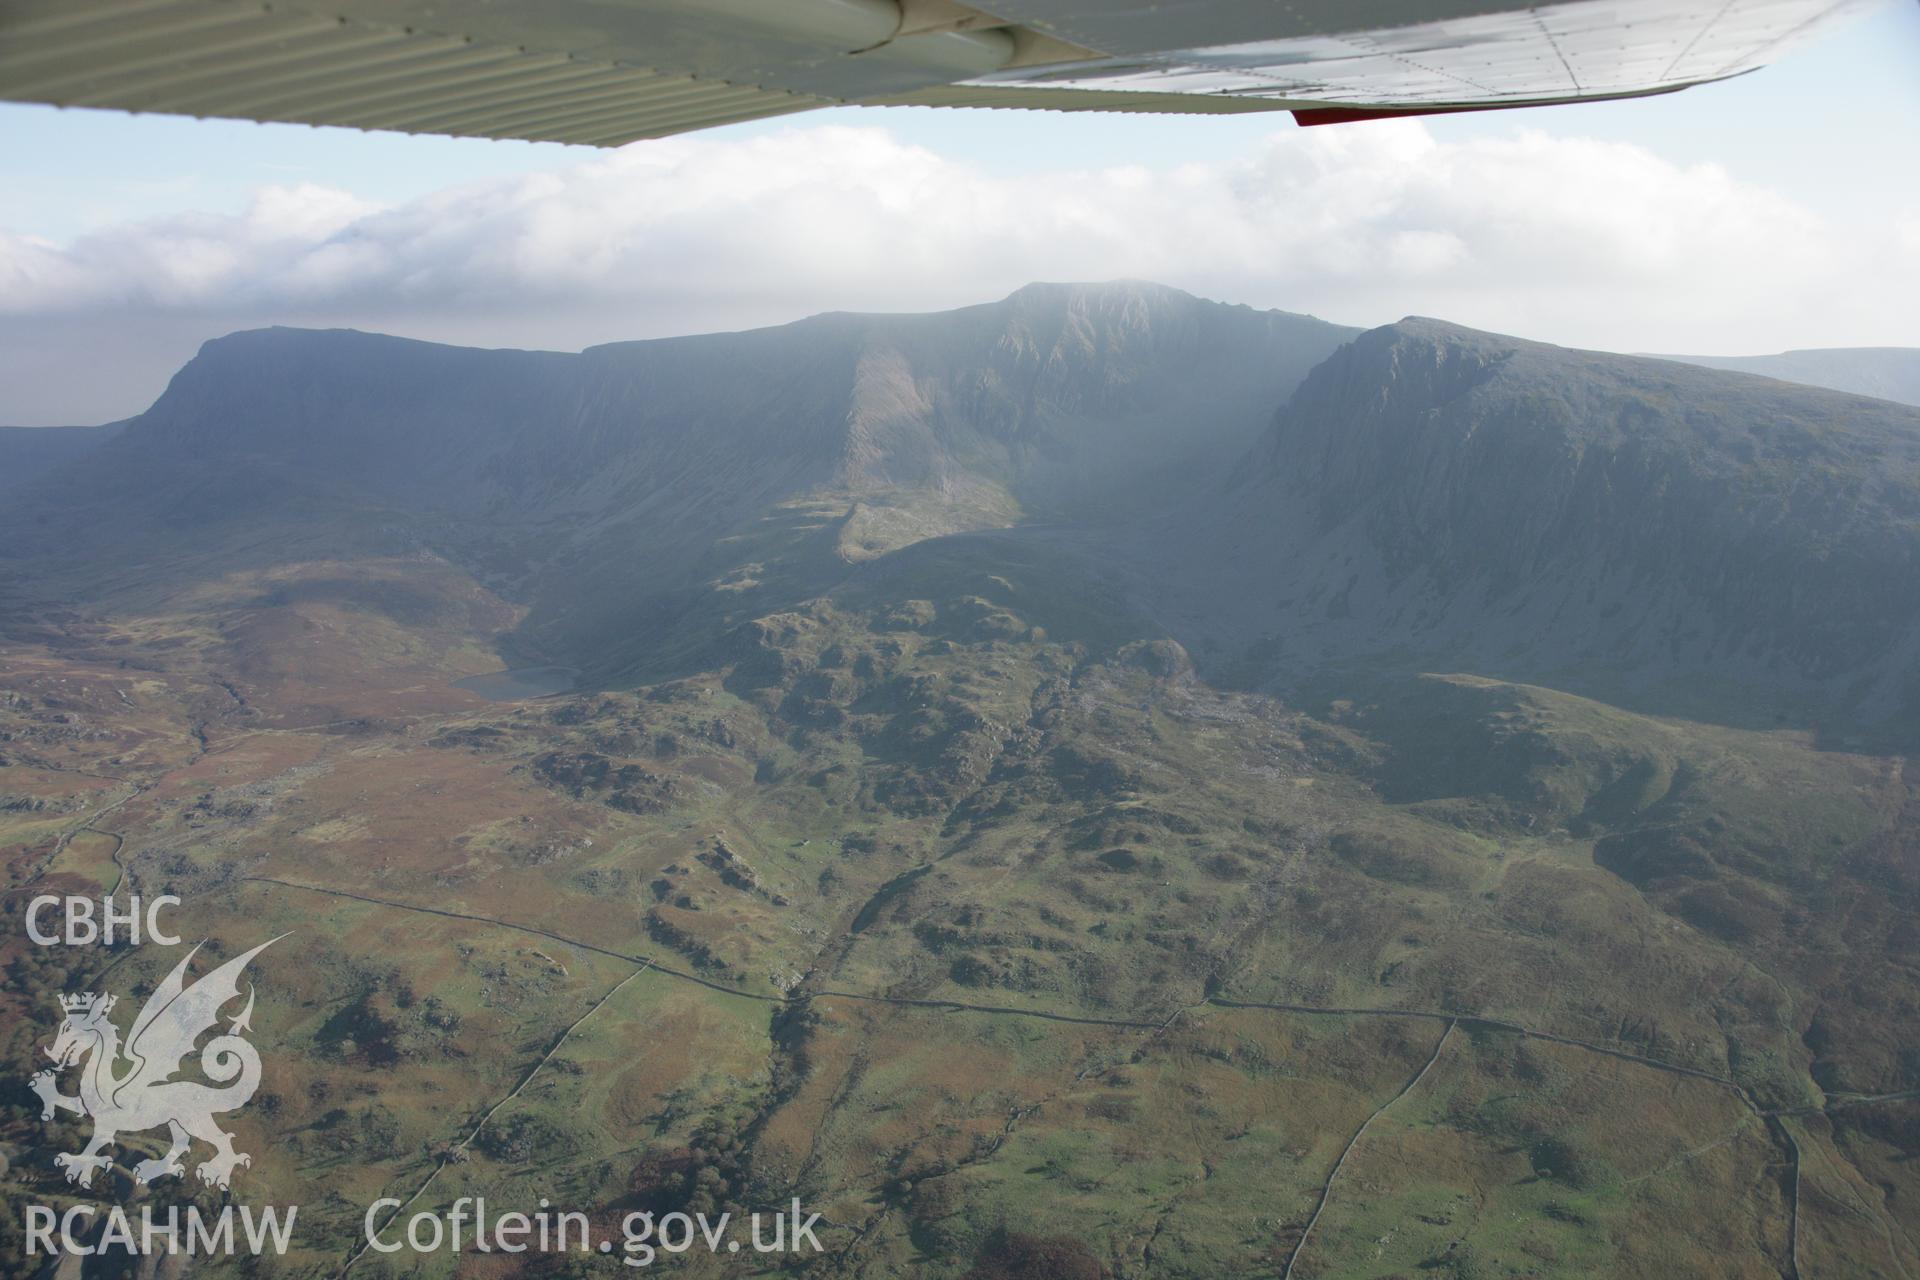 RCAHMW colour oblique aerial photograph of Cadair Idris from the north-west. Taken on 17 October 2005 by Toby Driver